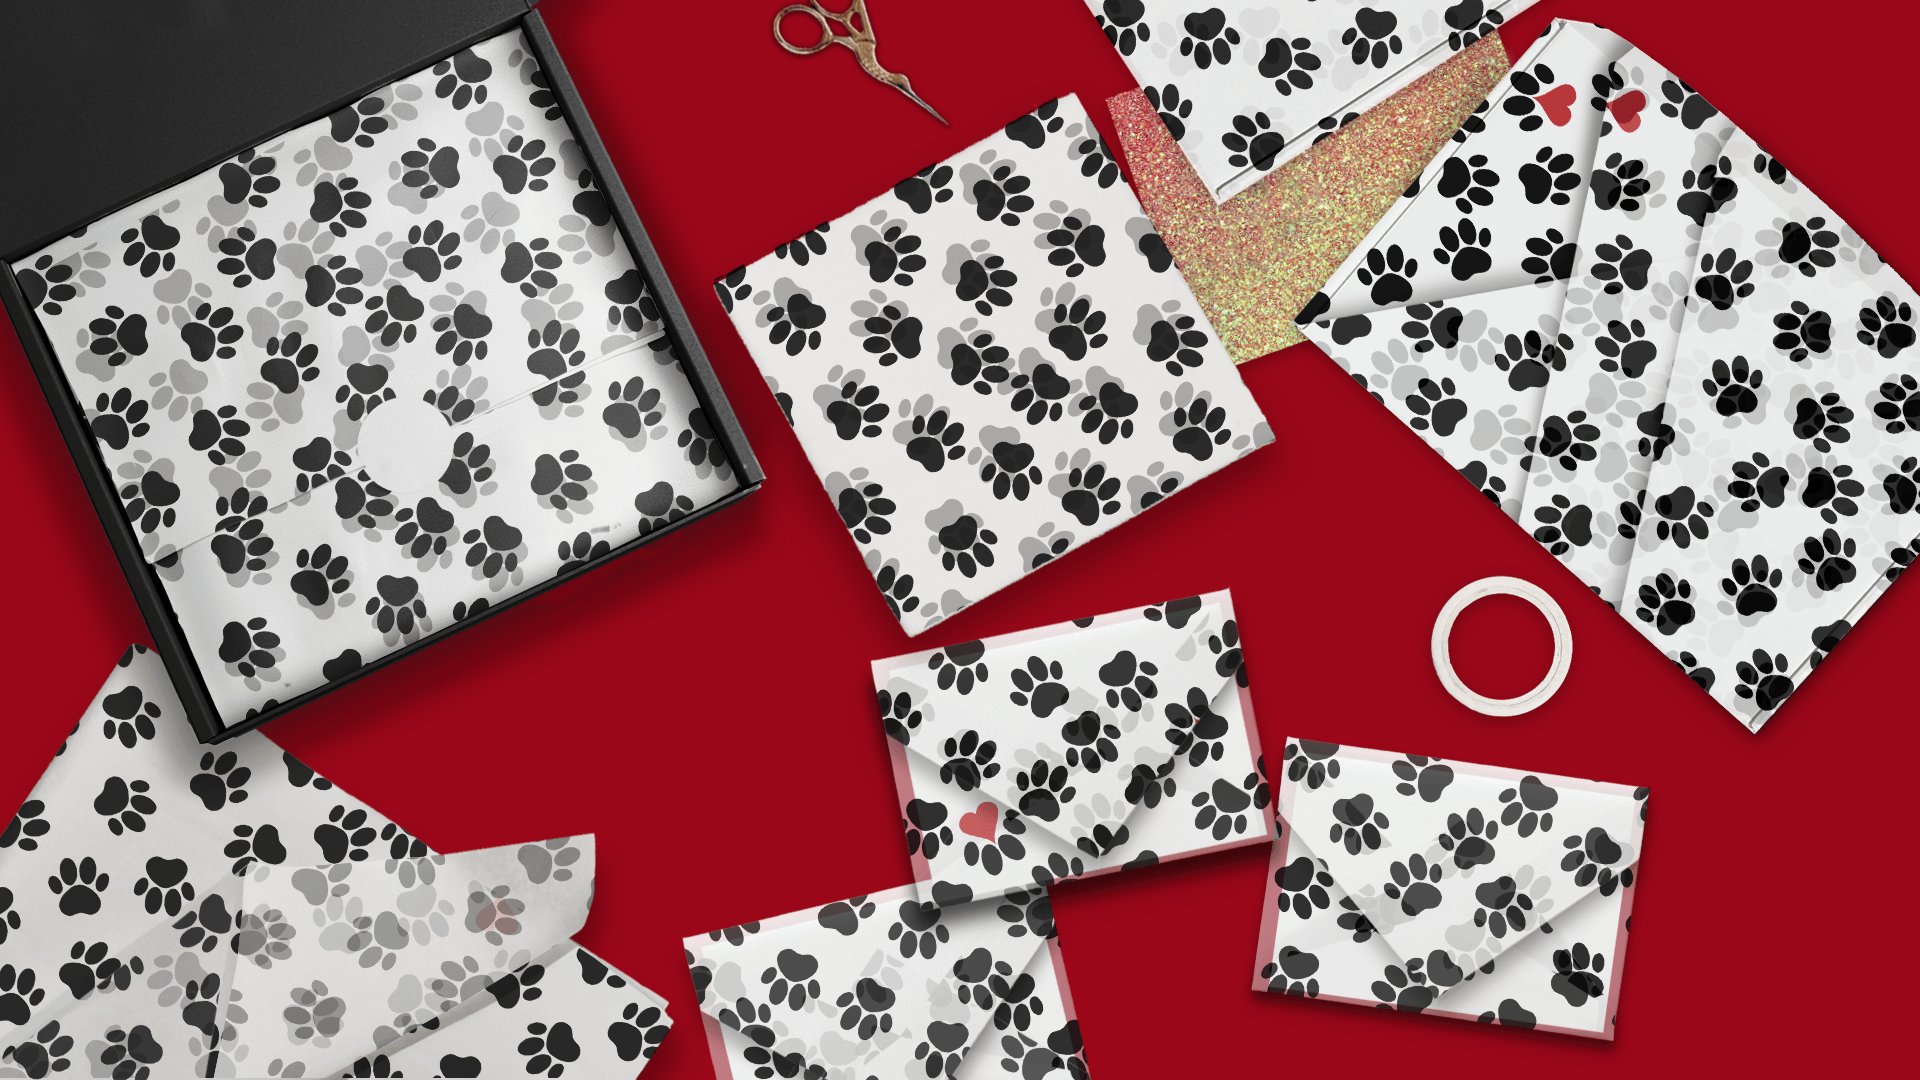 Paws Tissue Paper for Gift Bags - Pro Supply Global